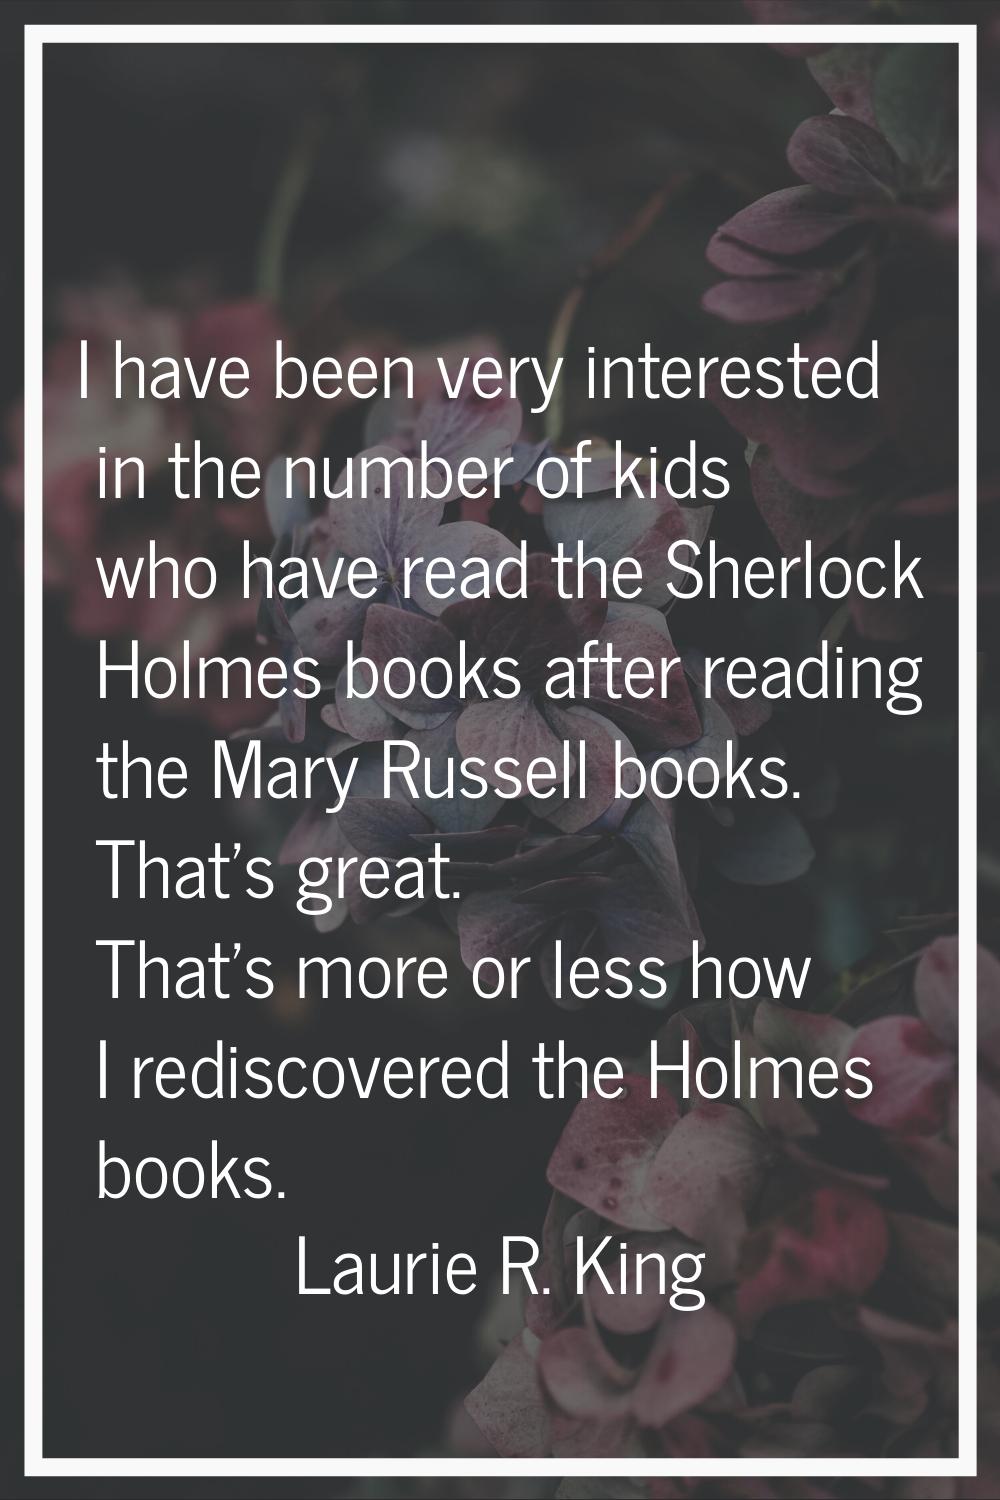 I have been very interested in the number of kids who have read the Sherlock Holmes books after rea